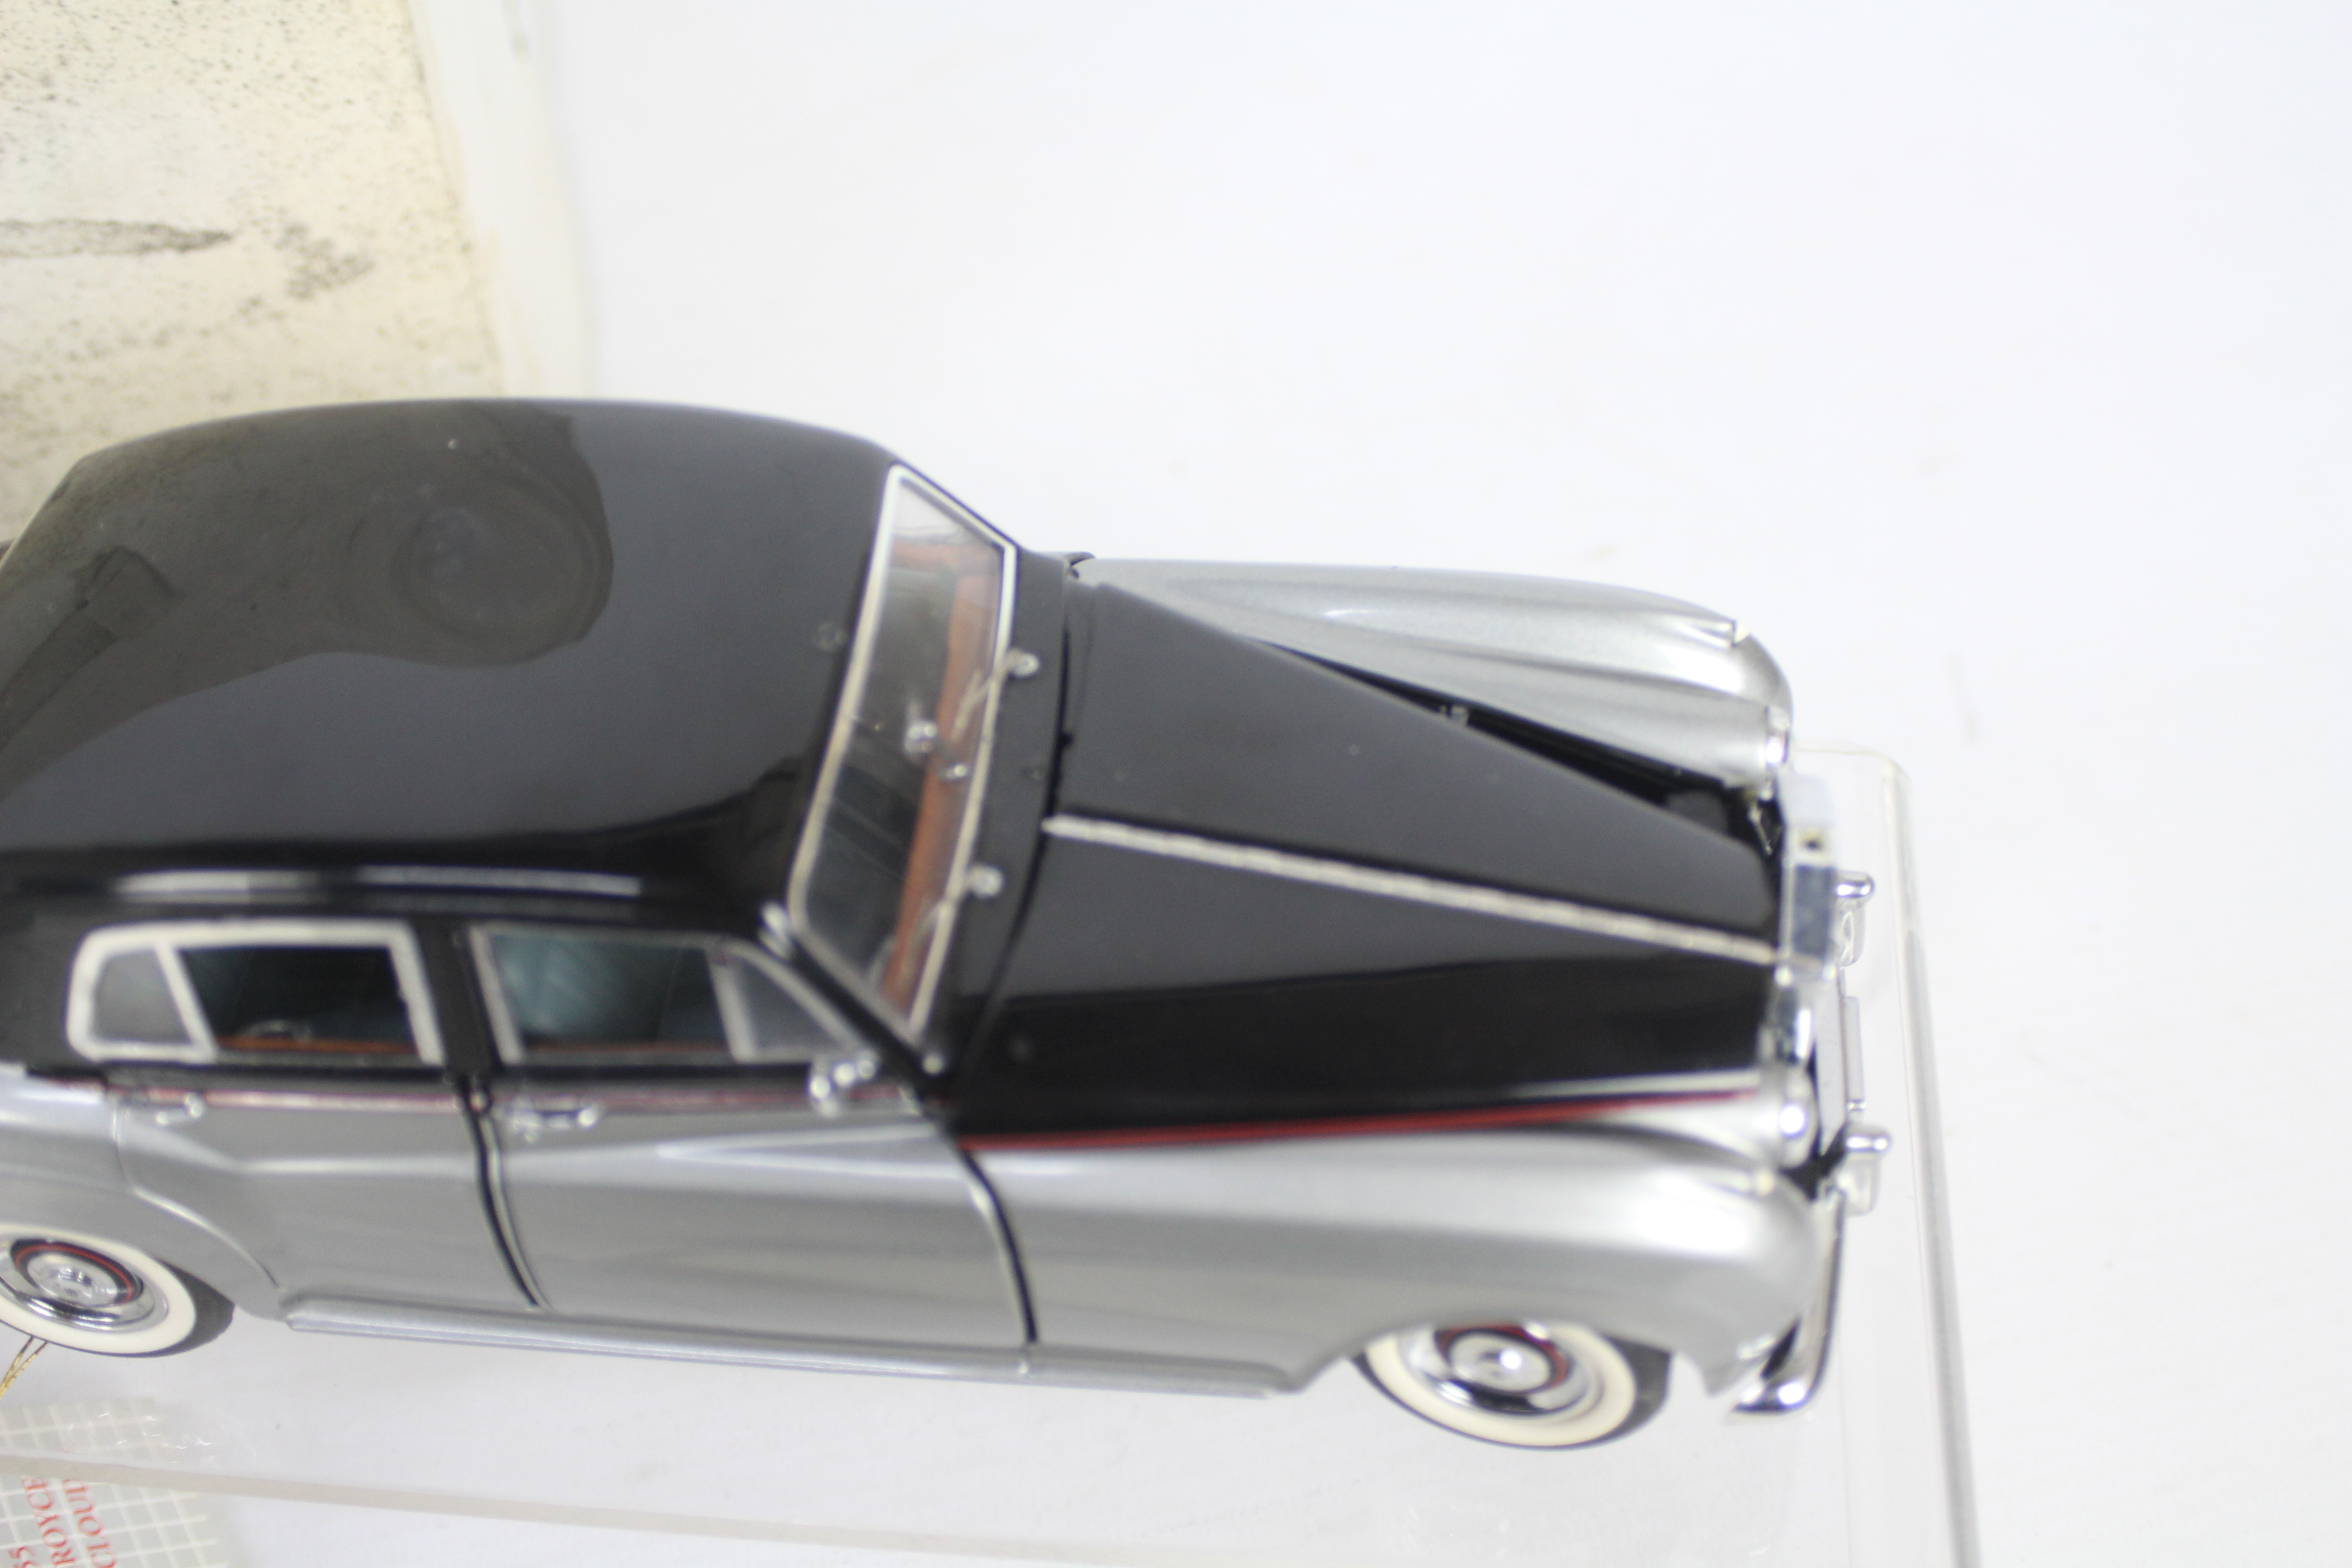 Franklin Mint - A boxed 1:24 scale 1955 Rolls Royce Silver Cloud by Franklin Mint. - Image 3 of 5